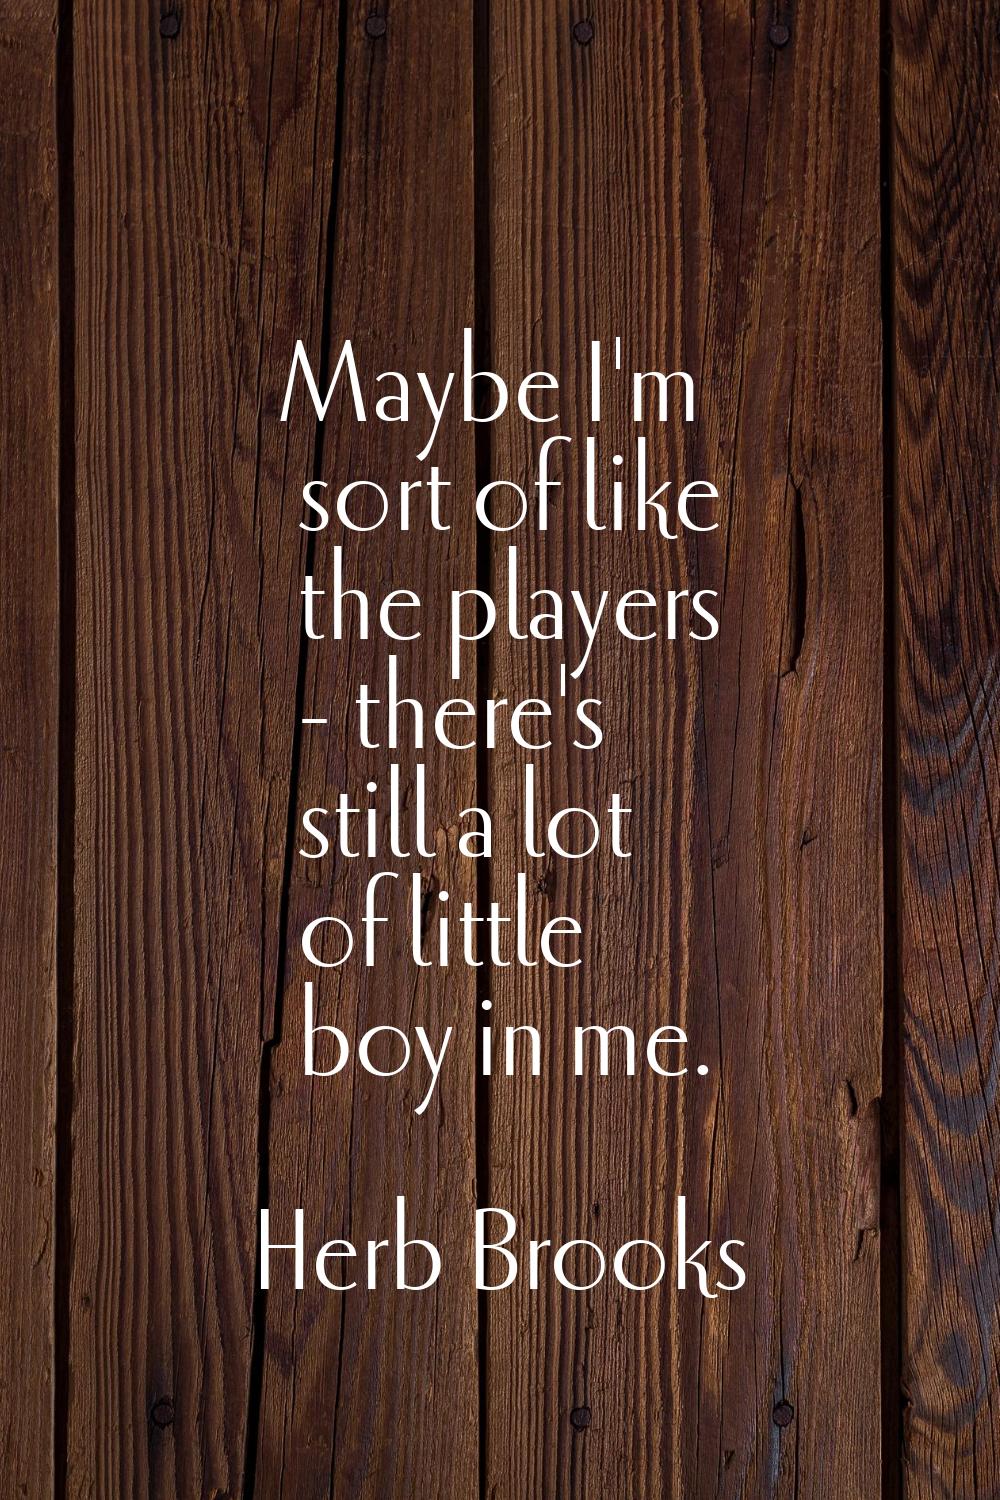 Maybe I'm sort of like the players - there's still a lot of little boy in me.